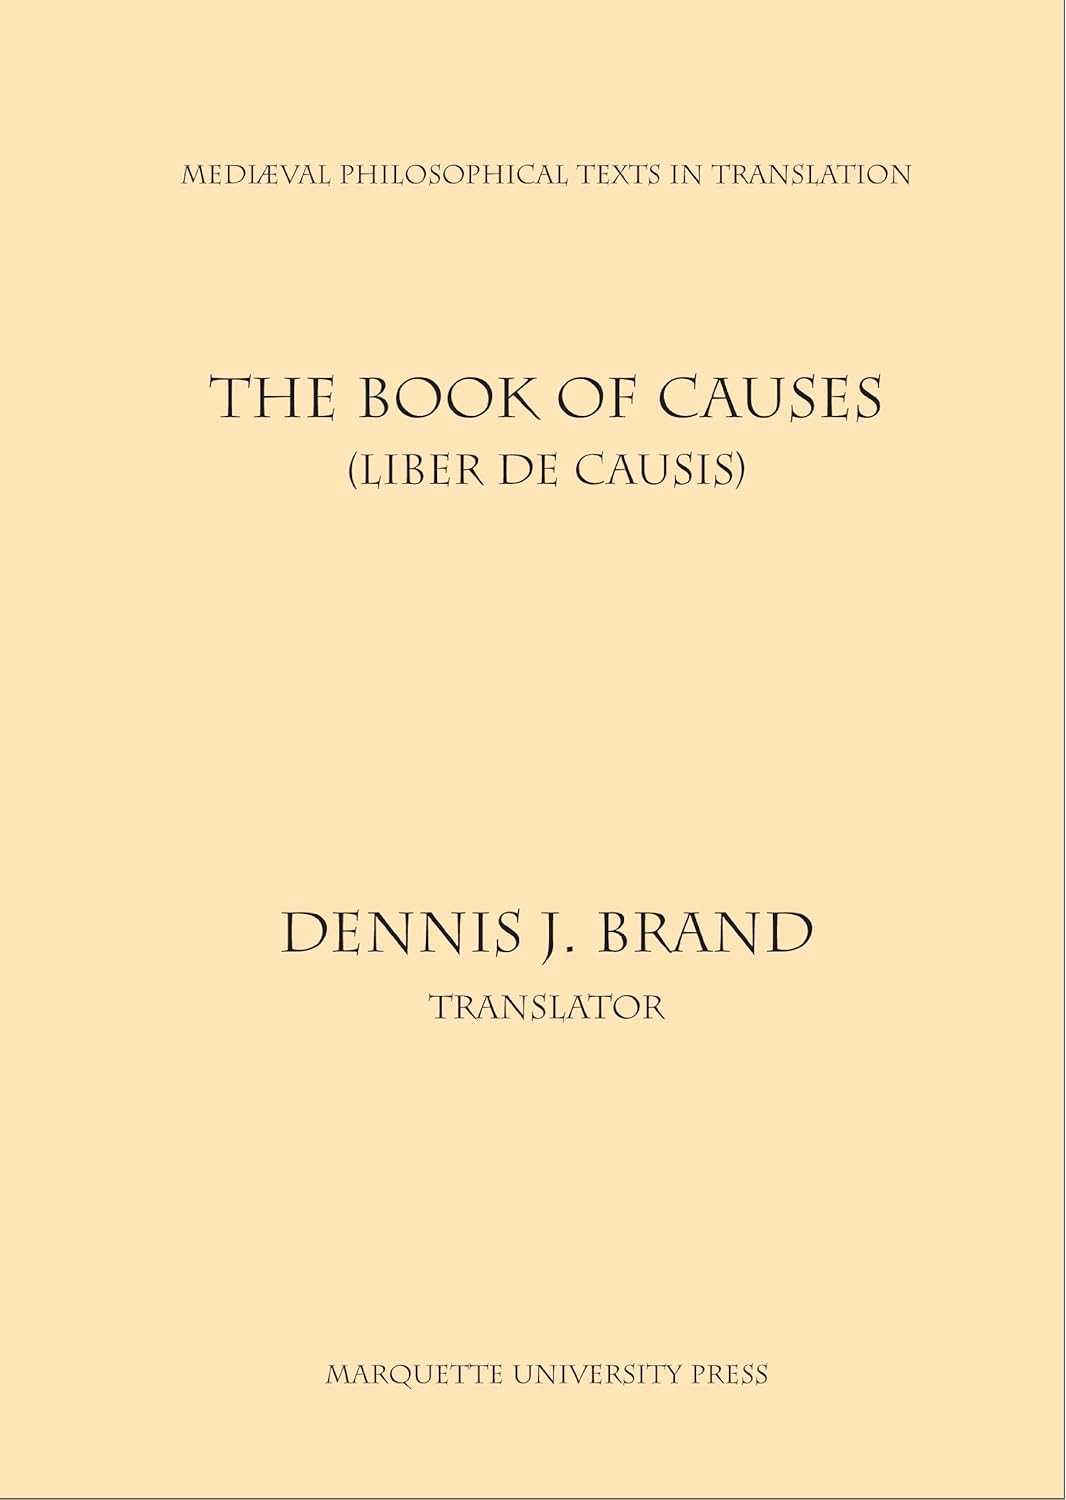 Book of Causes